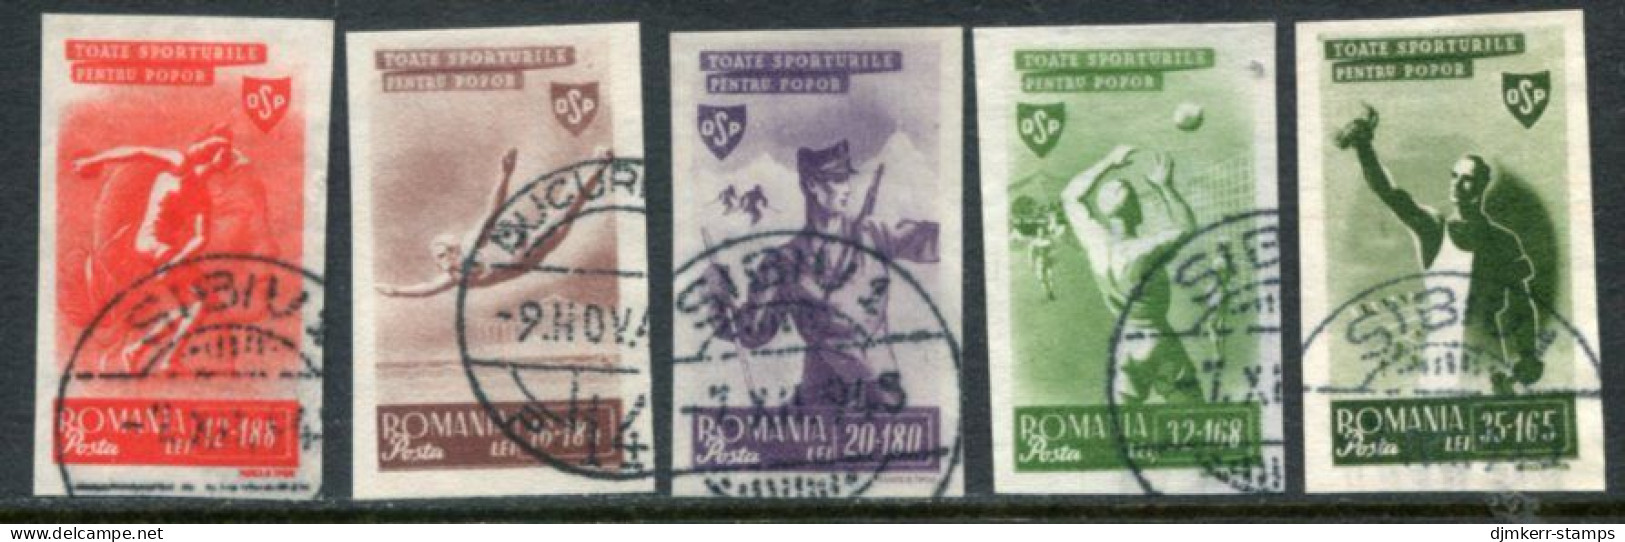 ROMANIA 1945 People's Sport Imperforate Used. Michel 879-83 - Oblitérés